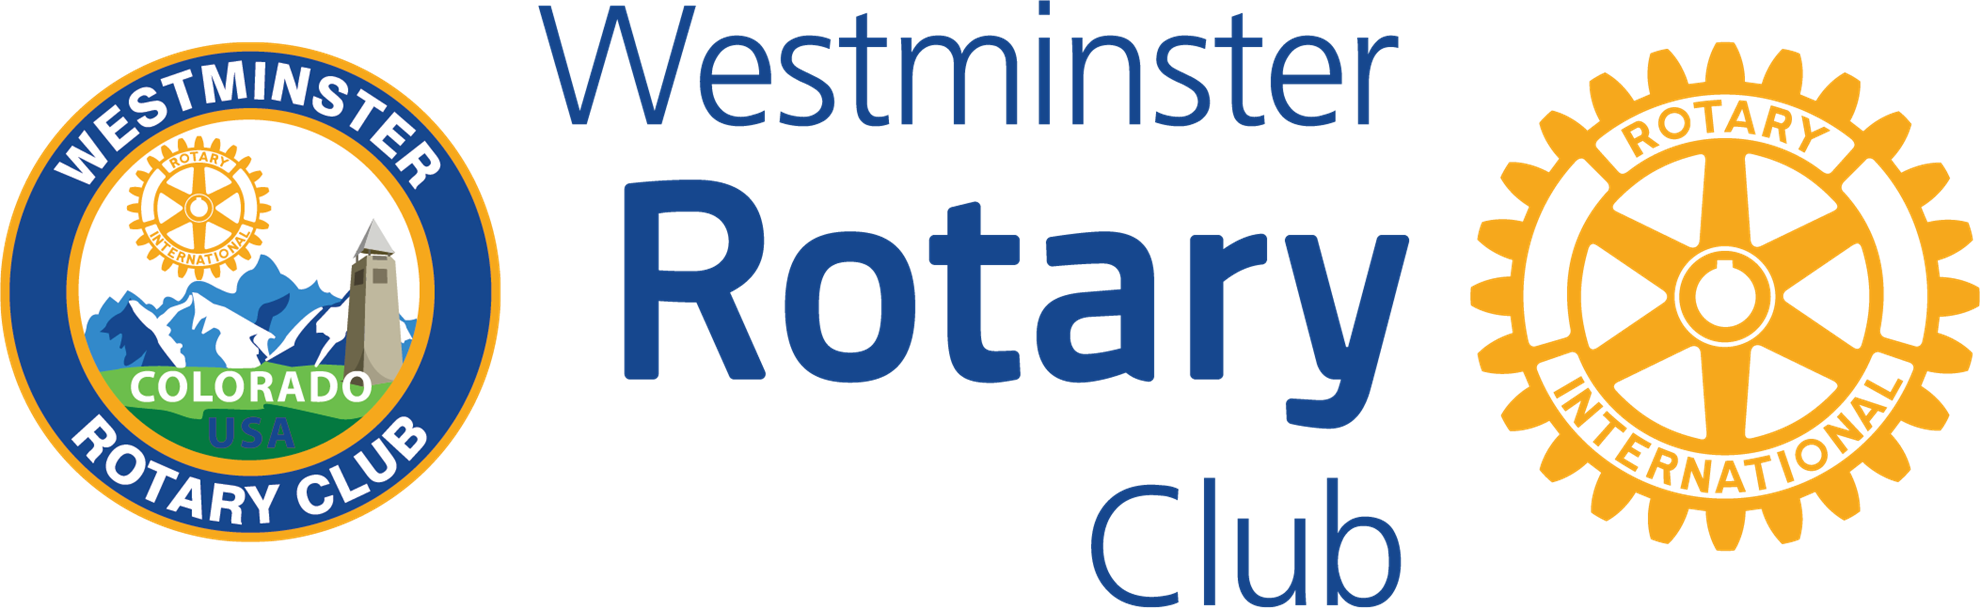 Home Page | Rotary Club of Westminster